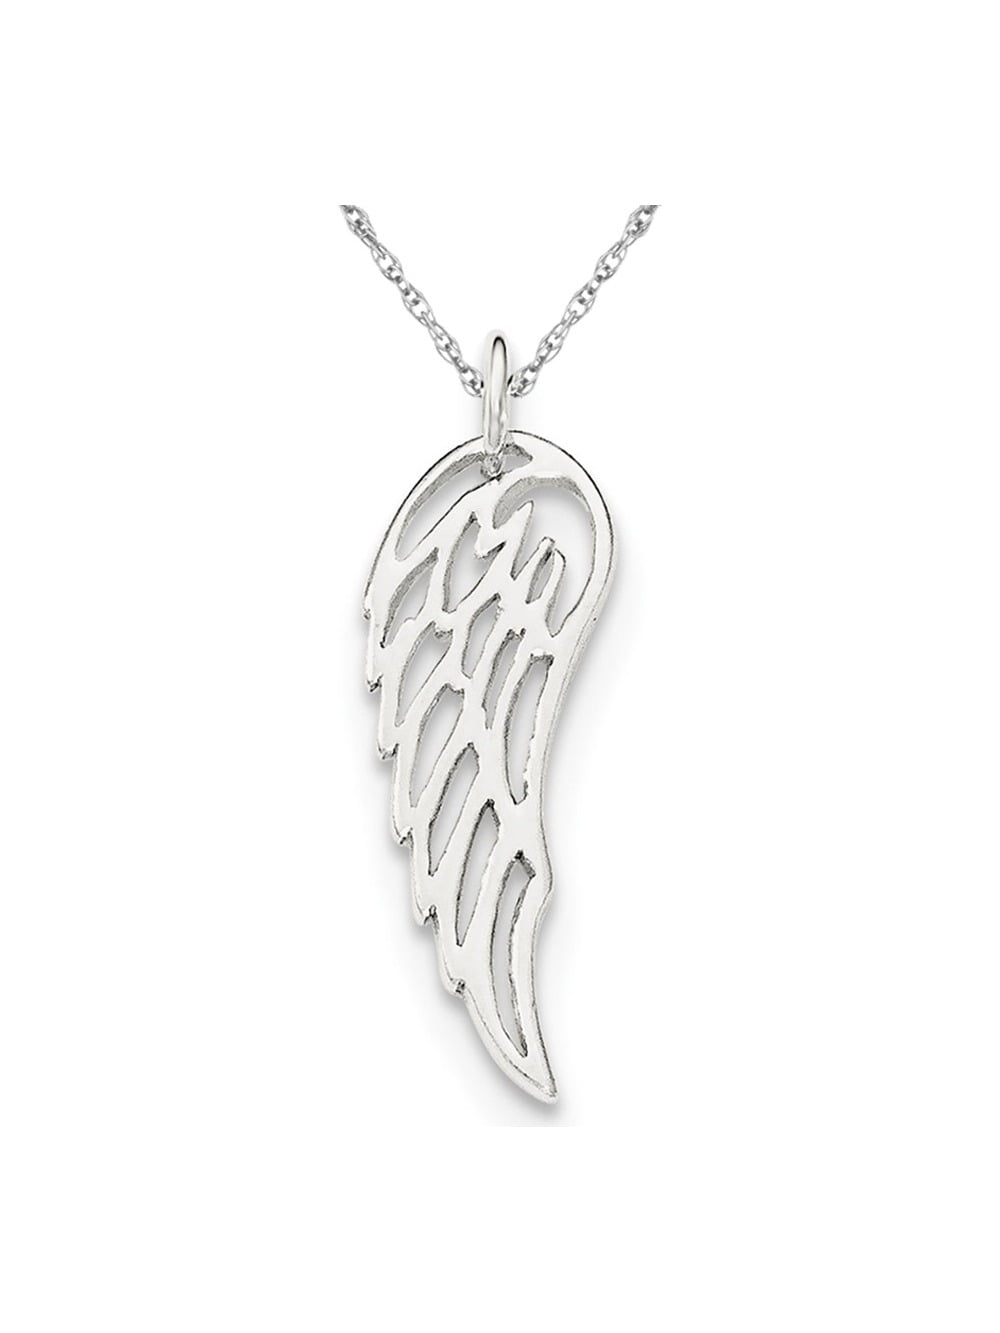 925 Sterling Silver ladies charm necklace pendant 18" chain gift cat wing om 